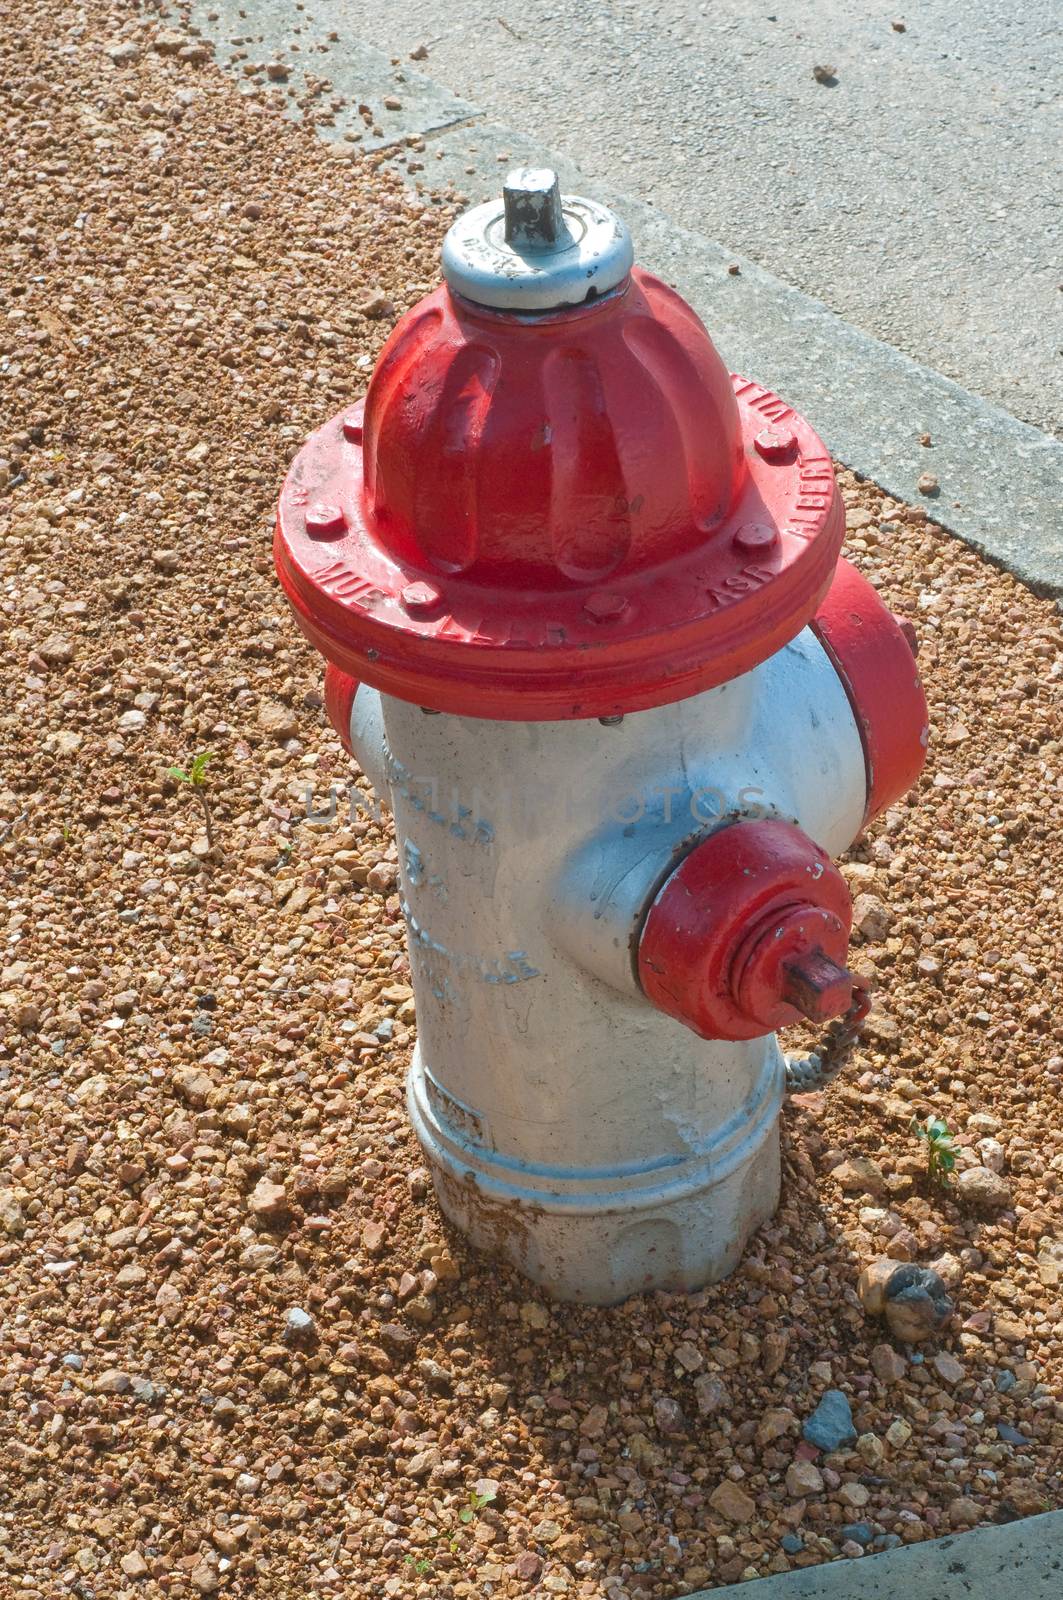 Red fire hydrant in urban area on side of road.